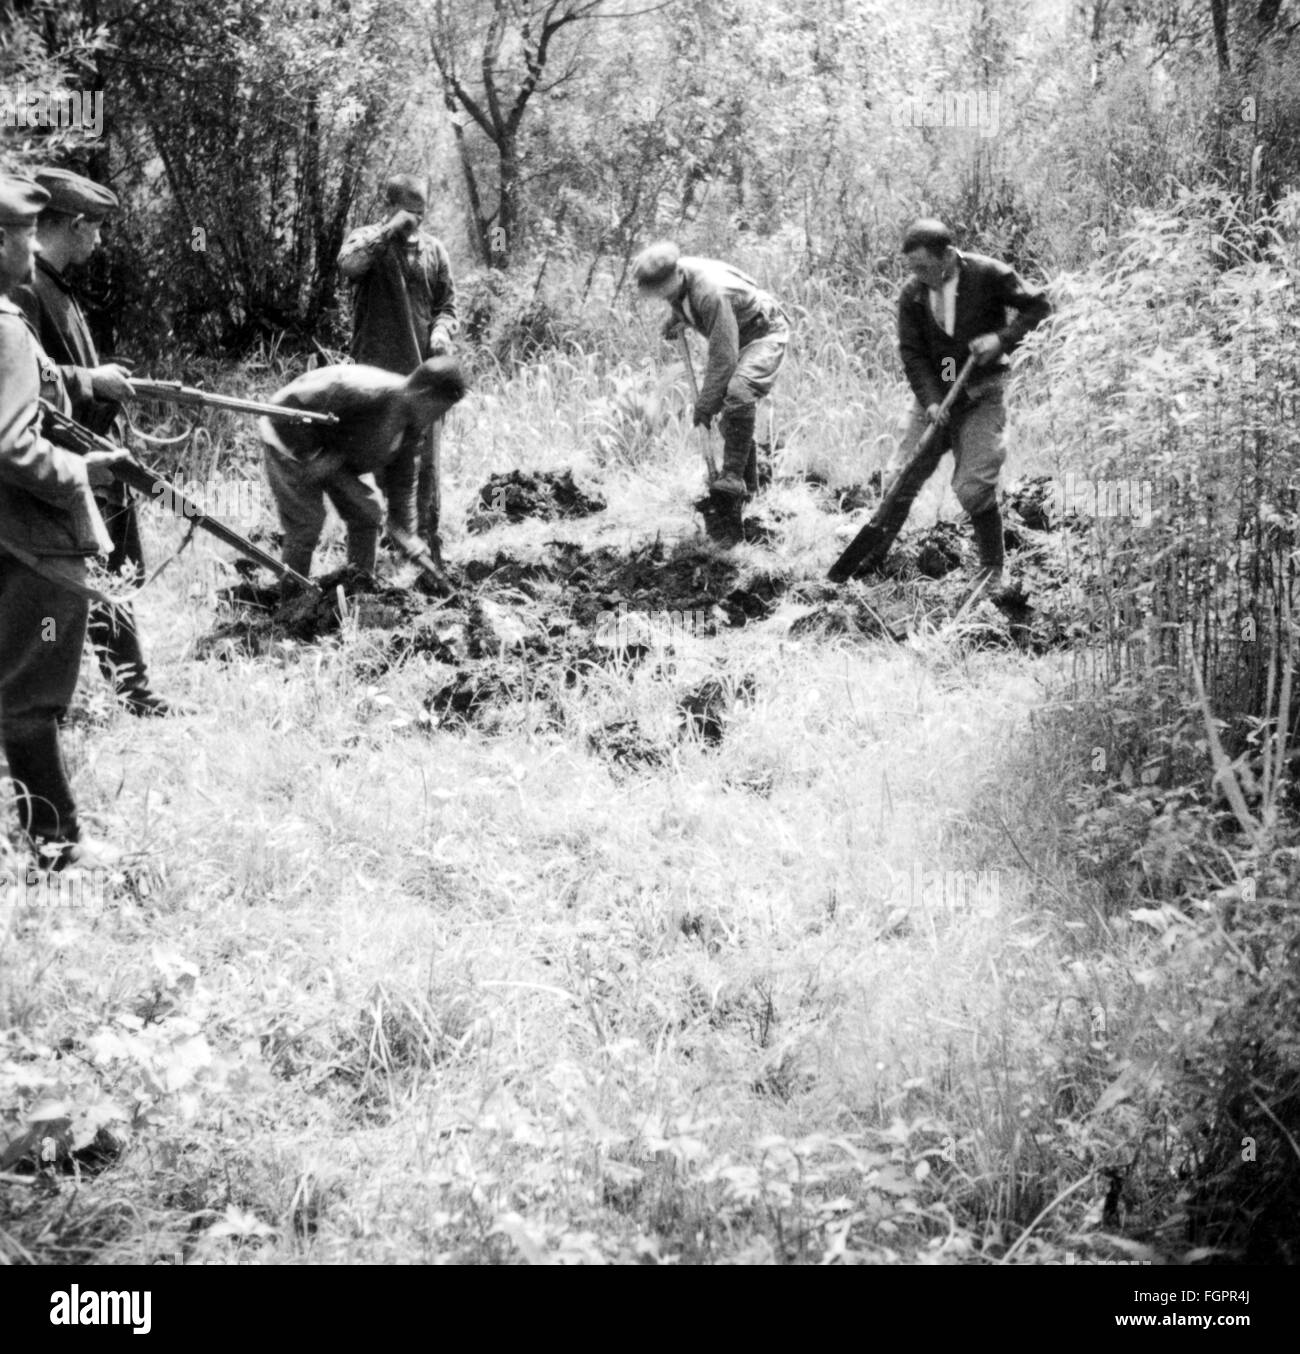 events, Second World War / WWII, Soviet Union, Soviet men working under German supervision, possibly partisans who dig graves, photo taken by a member of the German Reich Labour Service (Reichsarbeitsdienst, RAD Abteilung K. 1/130), Army Group South, 1st Panzer Army, Ukraine, Additional-Rights-Clearences-Not Available Stock Photo